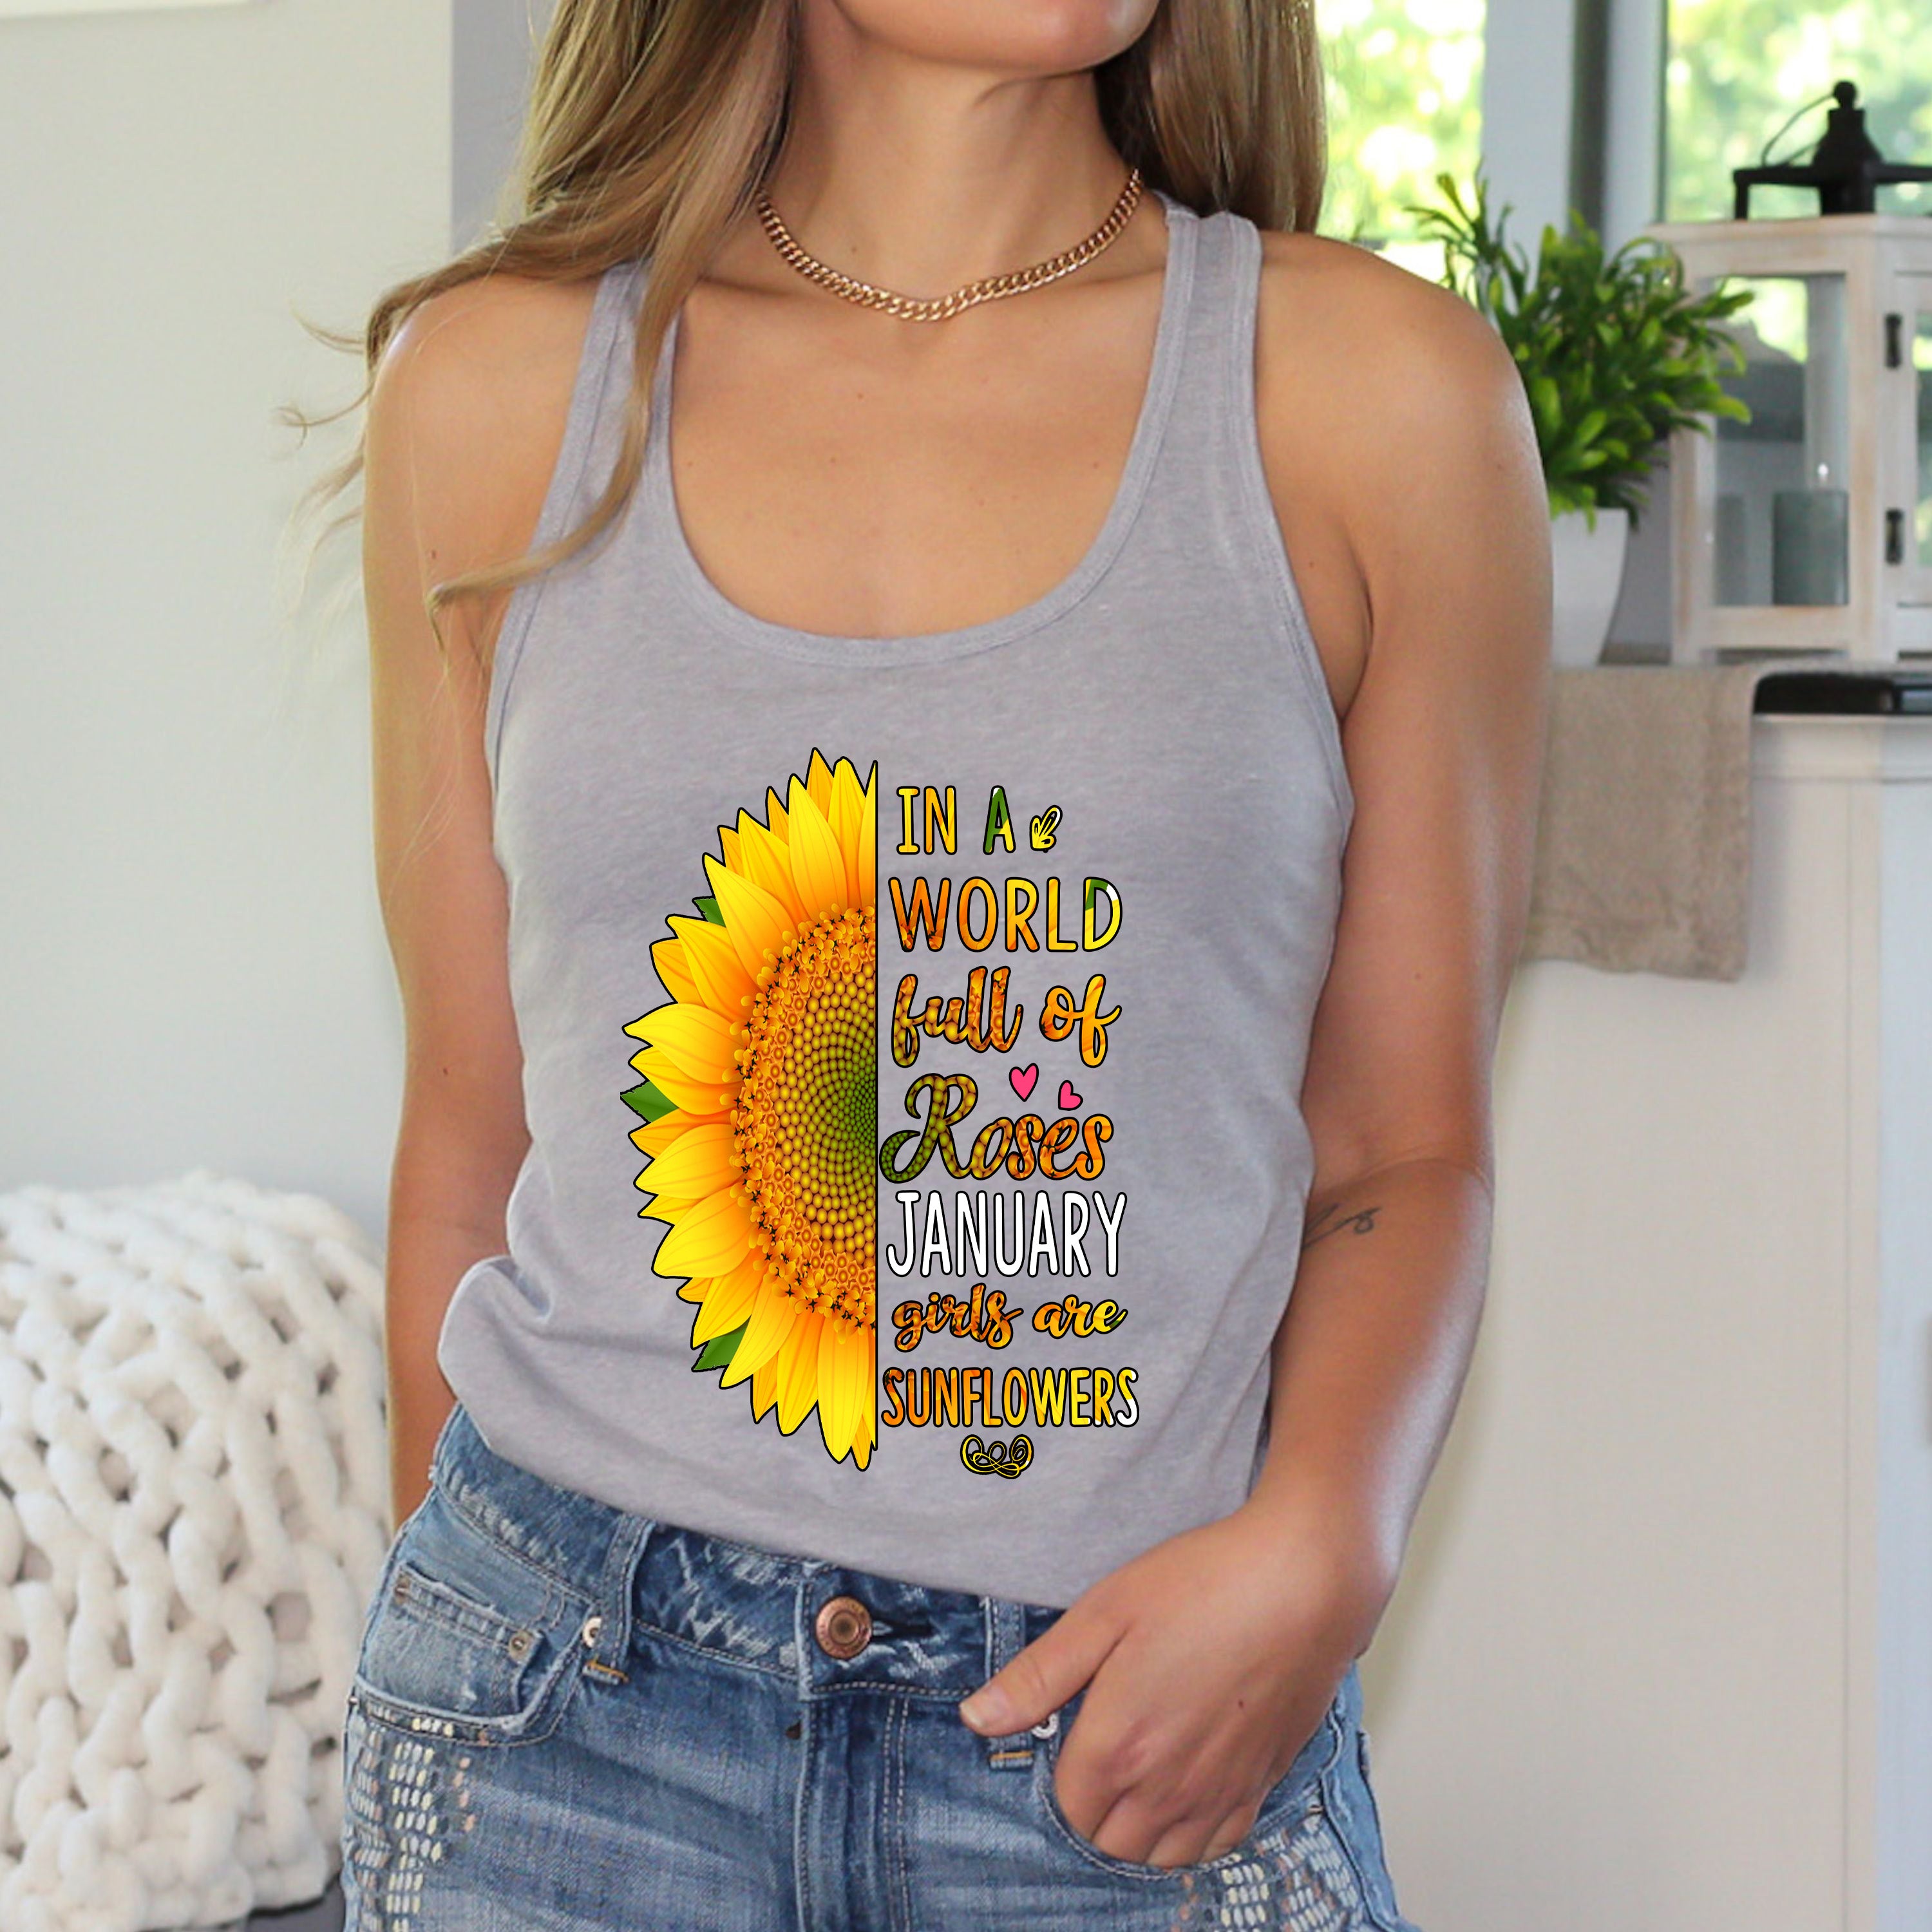 "In a world full of roses January girls are Sunflowers"